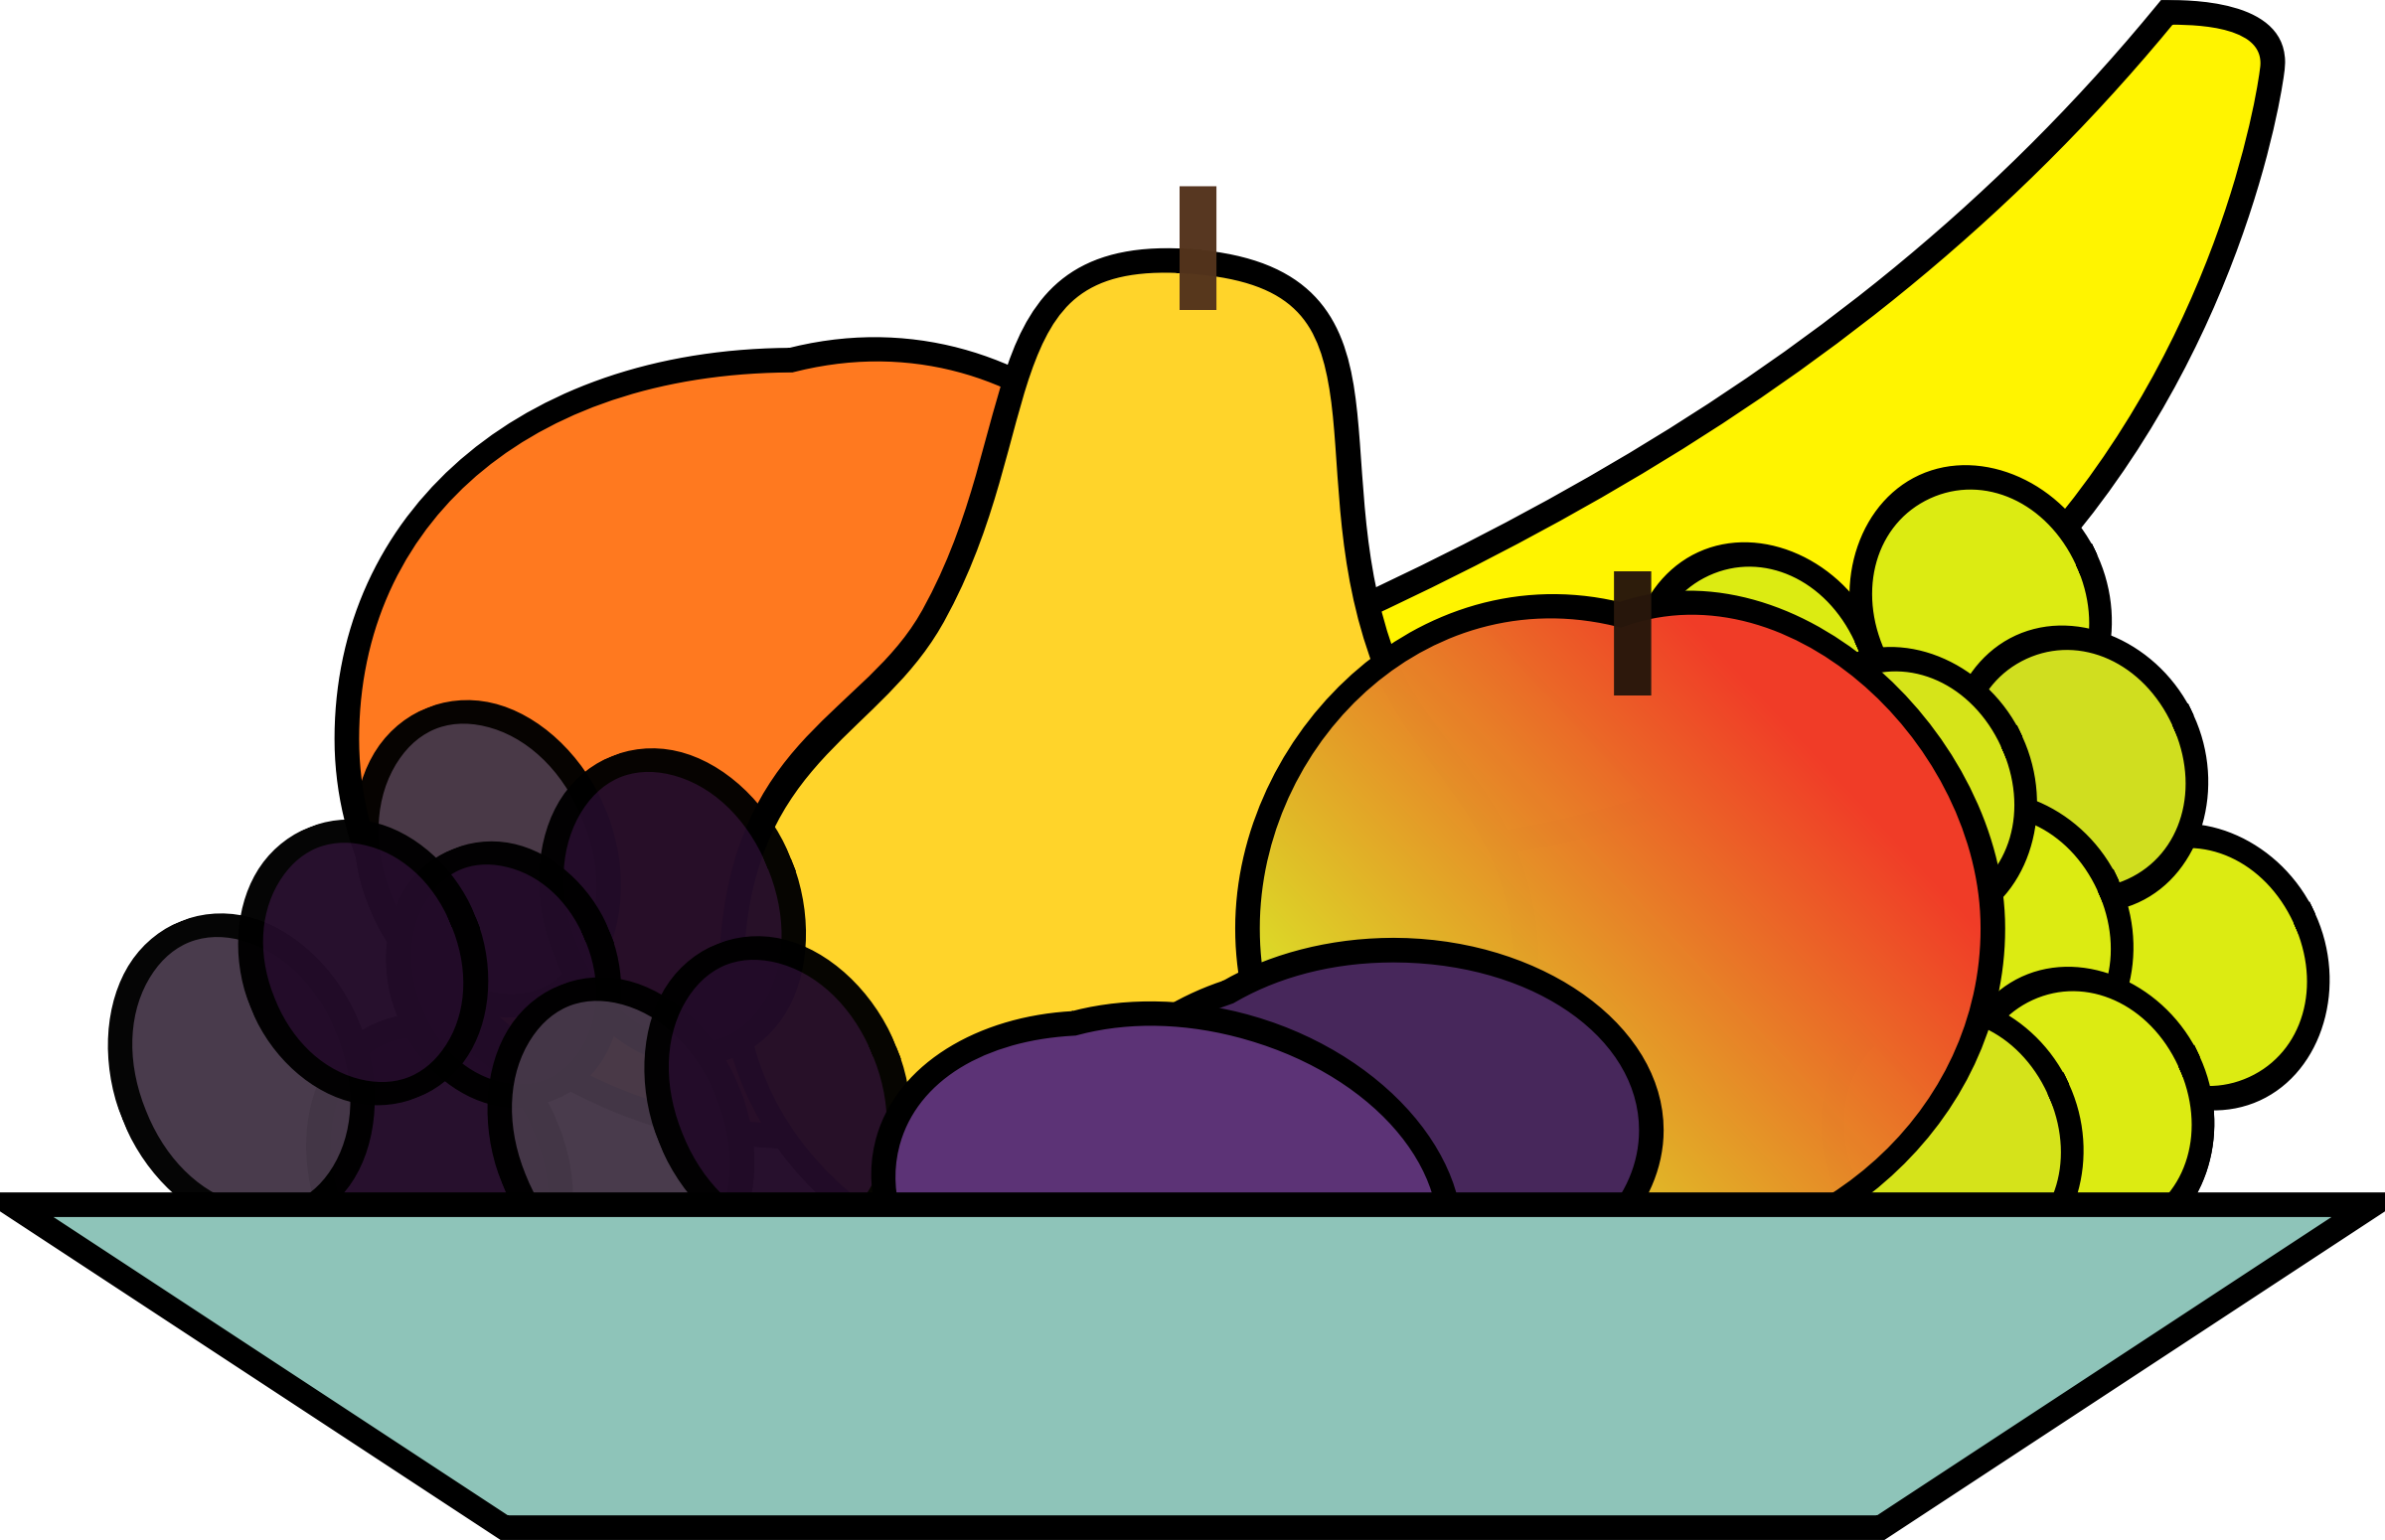 Free Fruits Clipart Images Fruits Clipart Free Images - Bowl Of Fruits Clip Art (2400x1550)